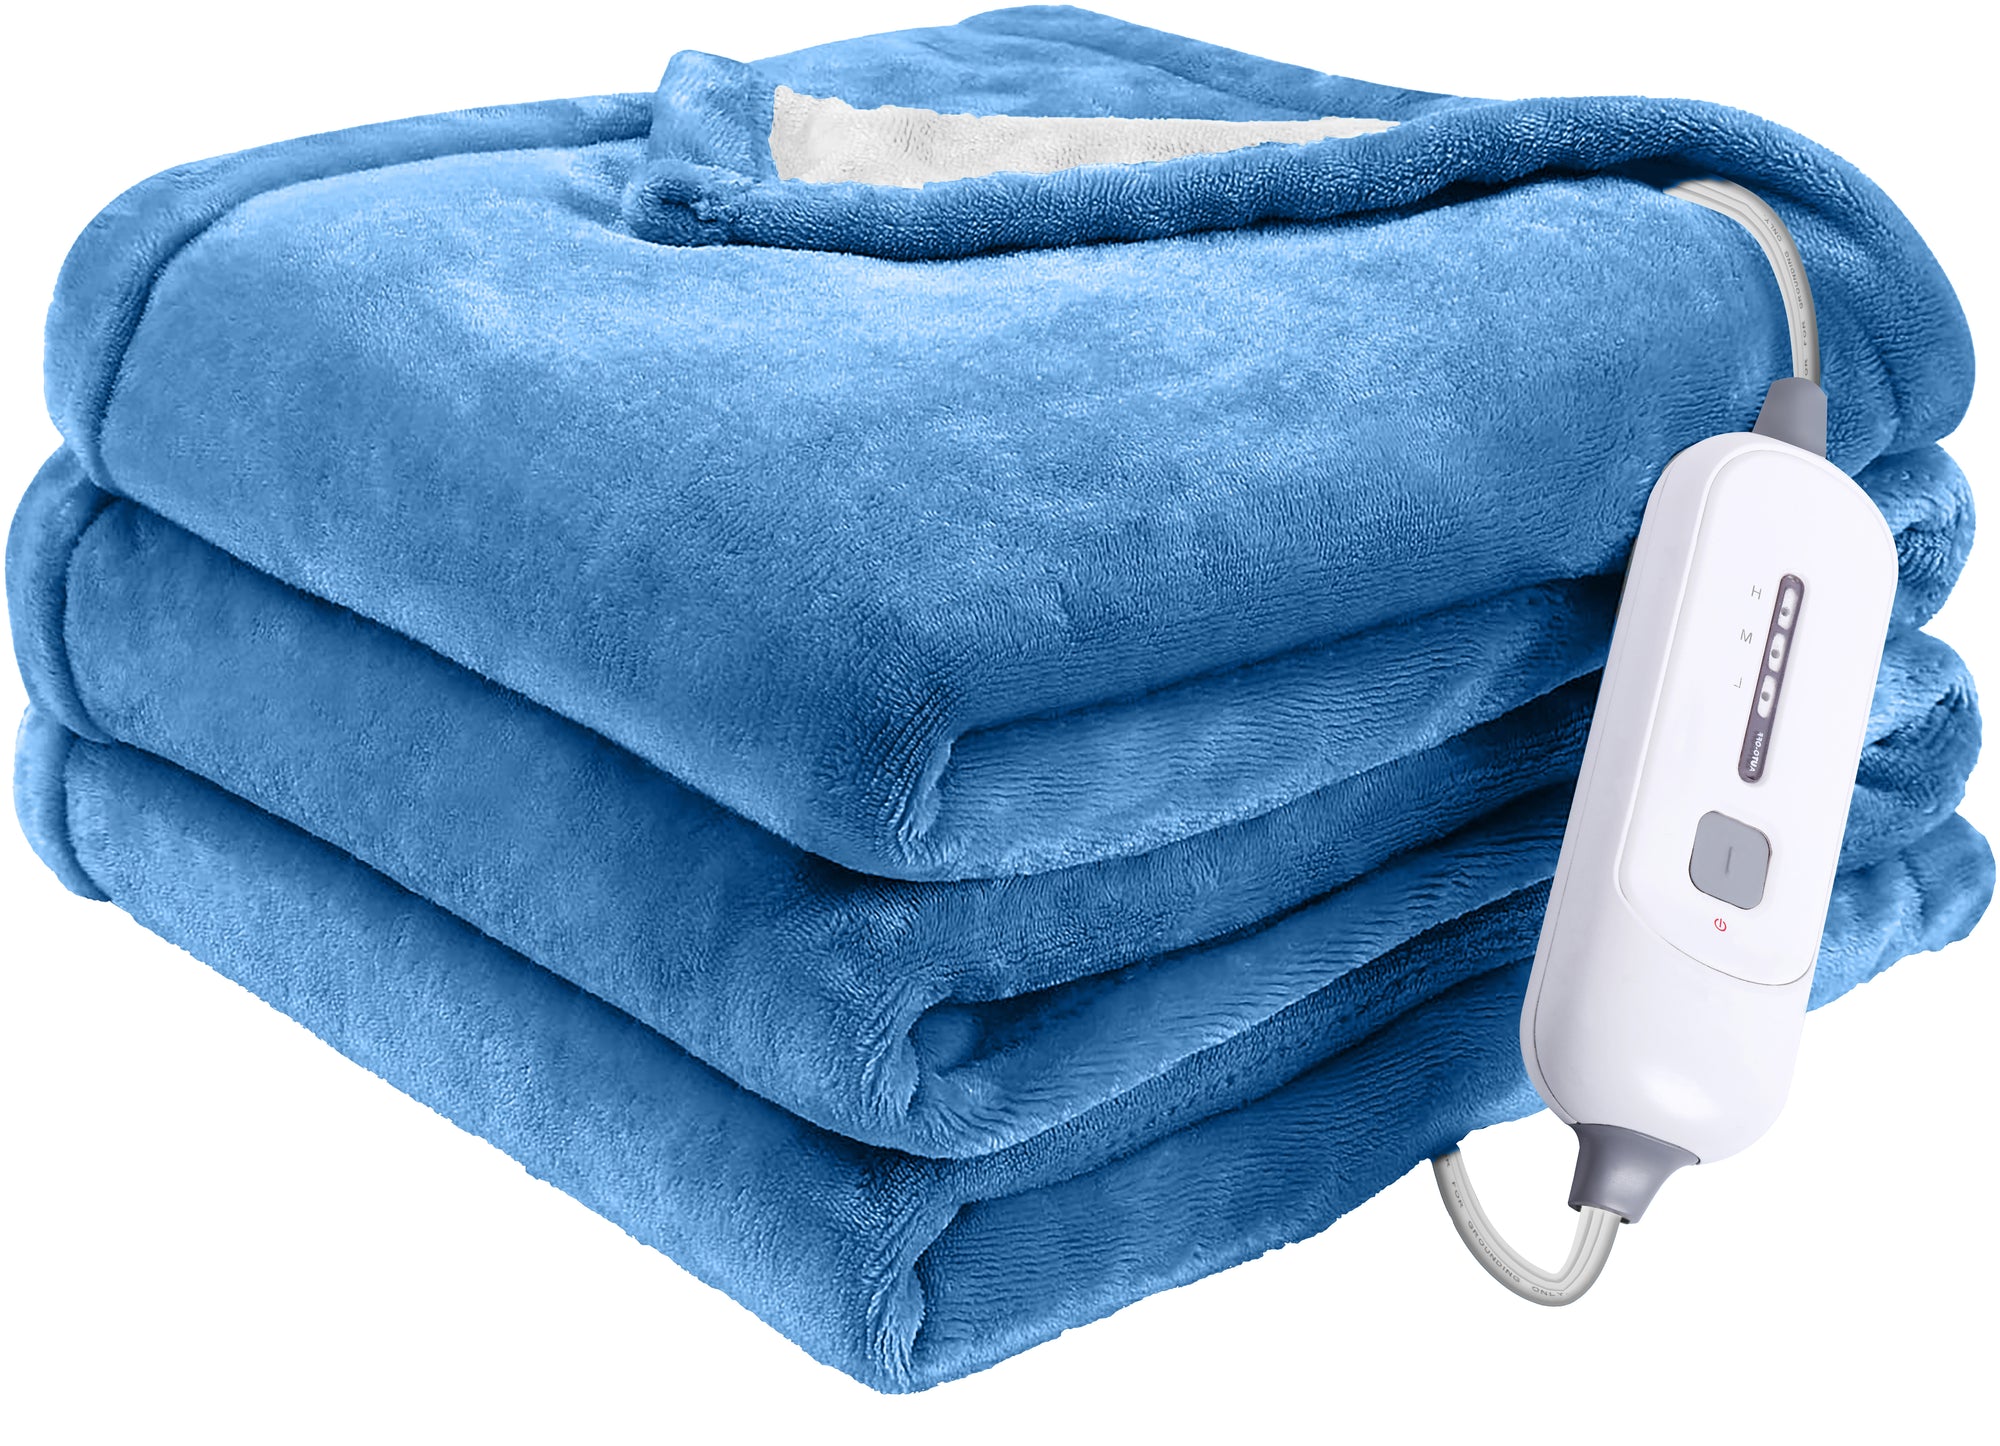 Shop Our Heated Blanket Blue 50"x60" On Amazon